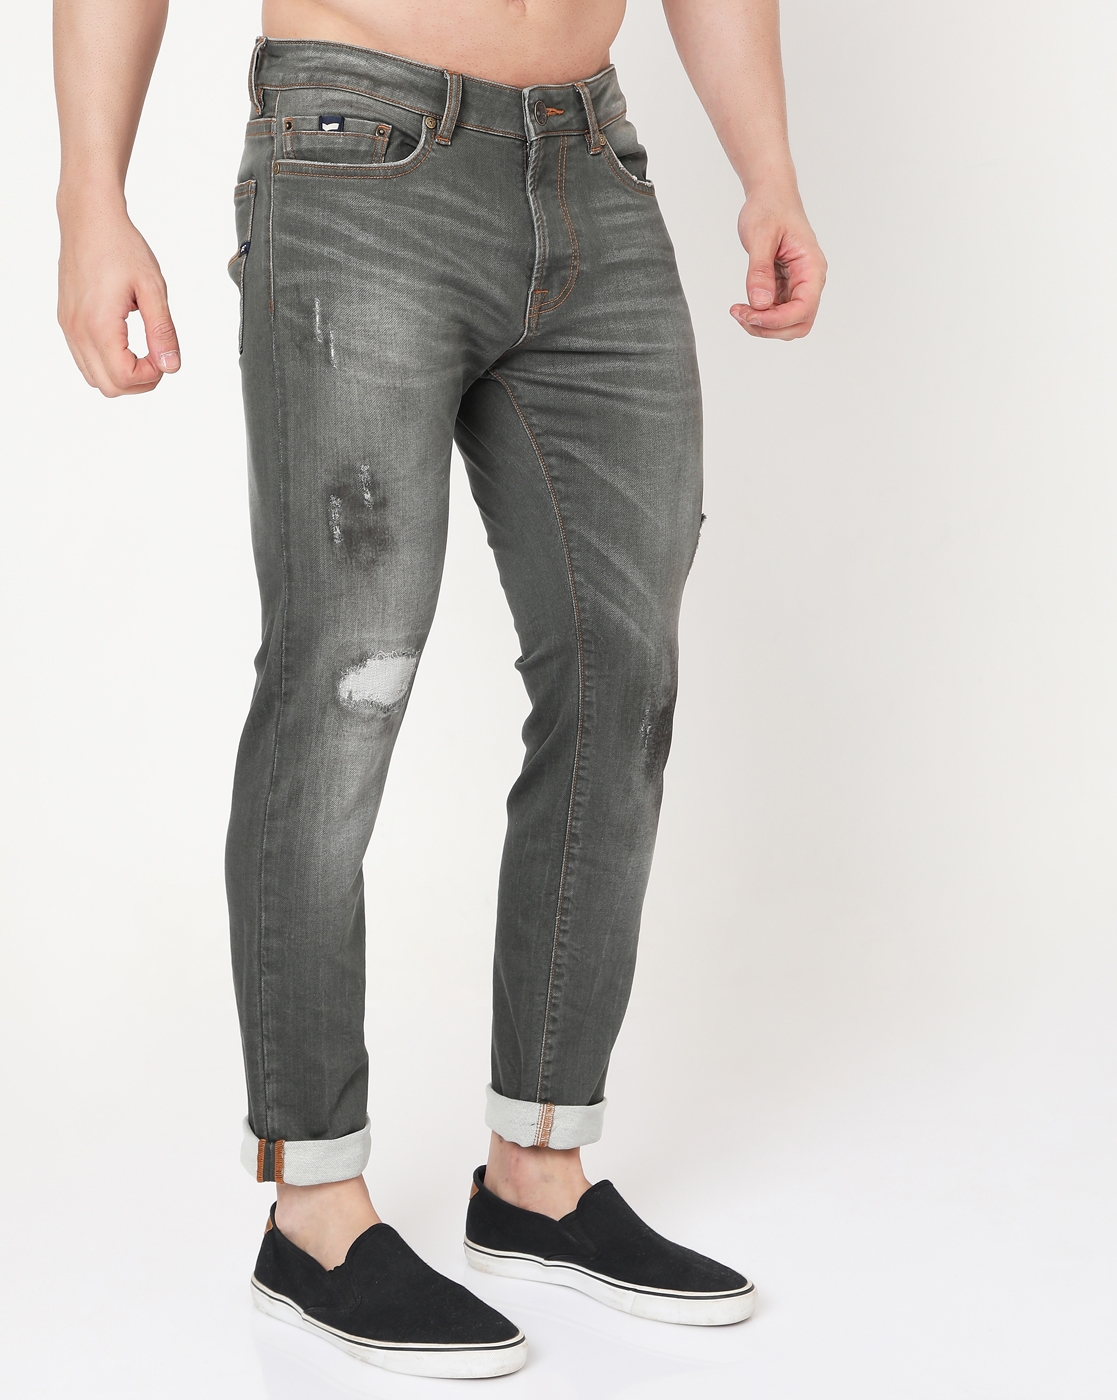 Men's Norton Carrot In Tapered Fit Jeans